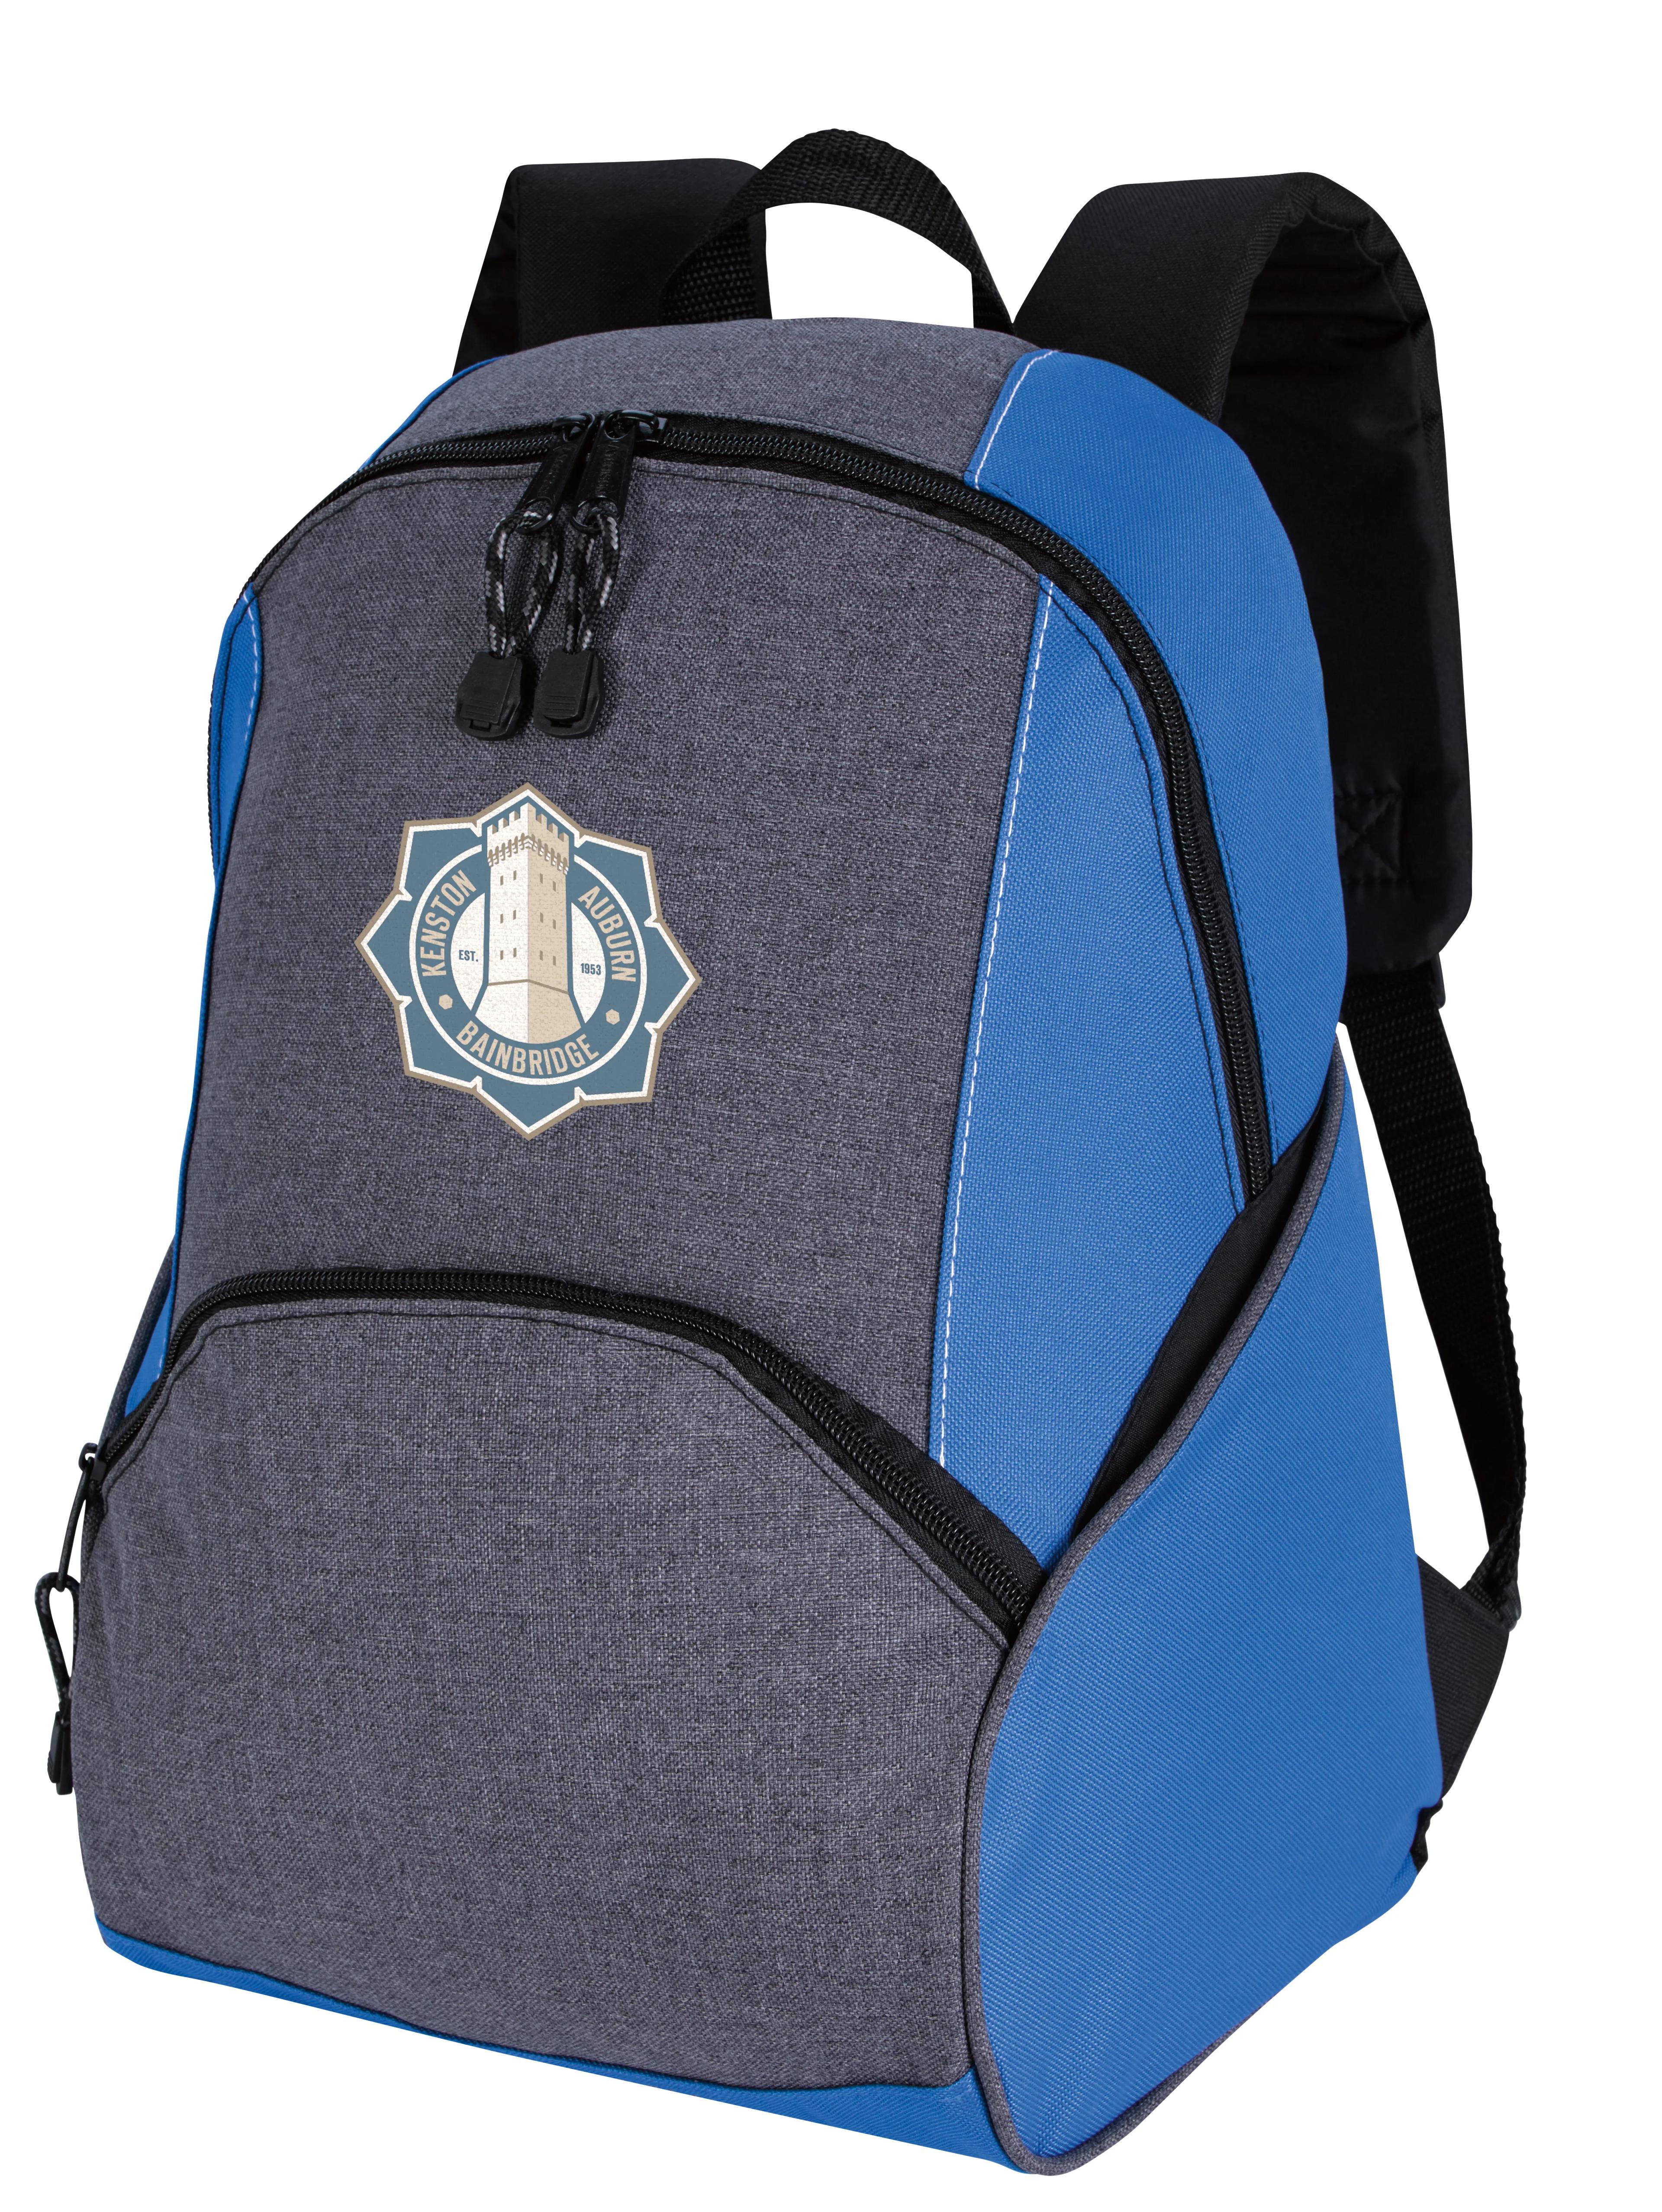 Two-Tone On the Move Backpack 17 of 25